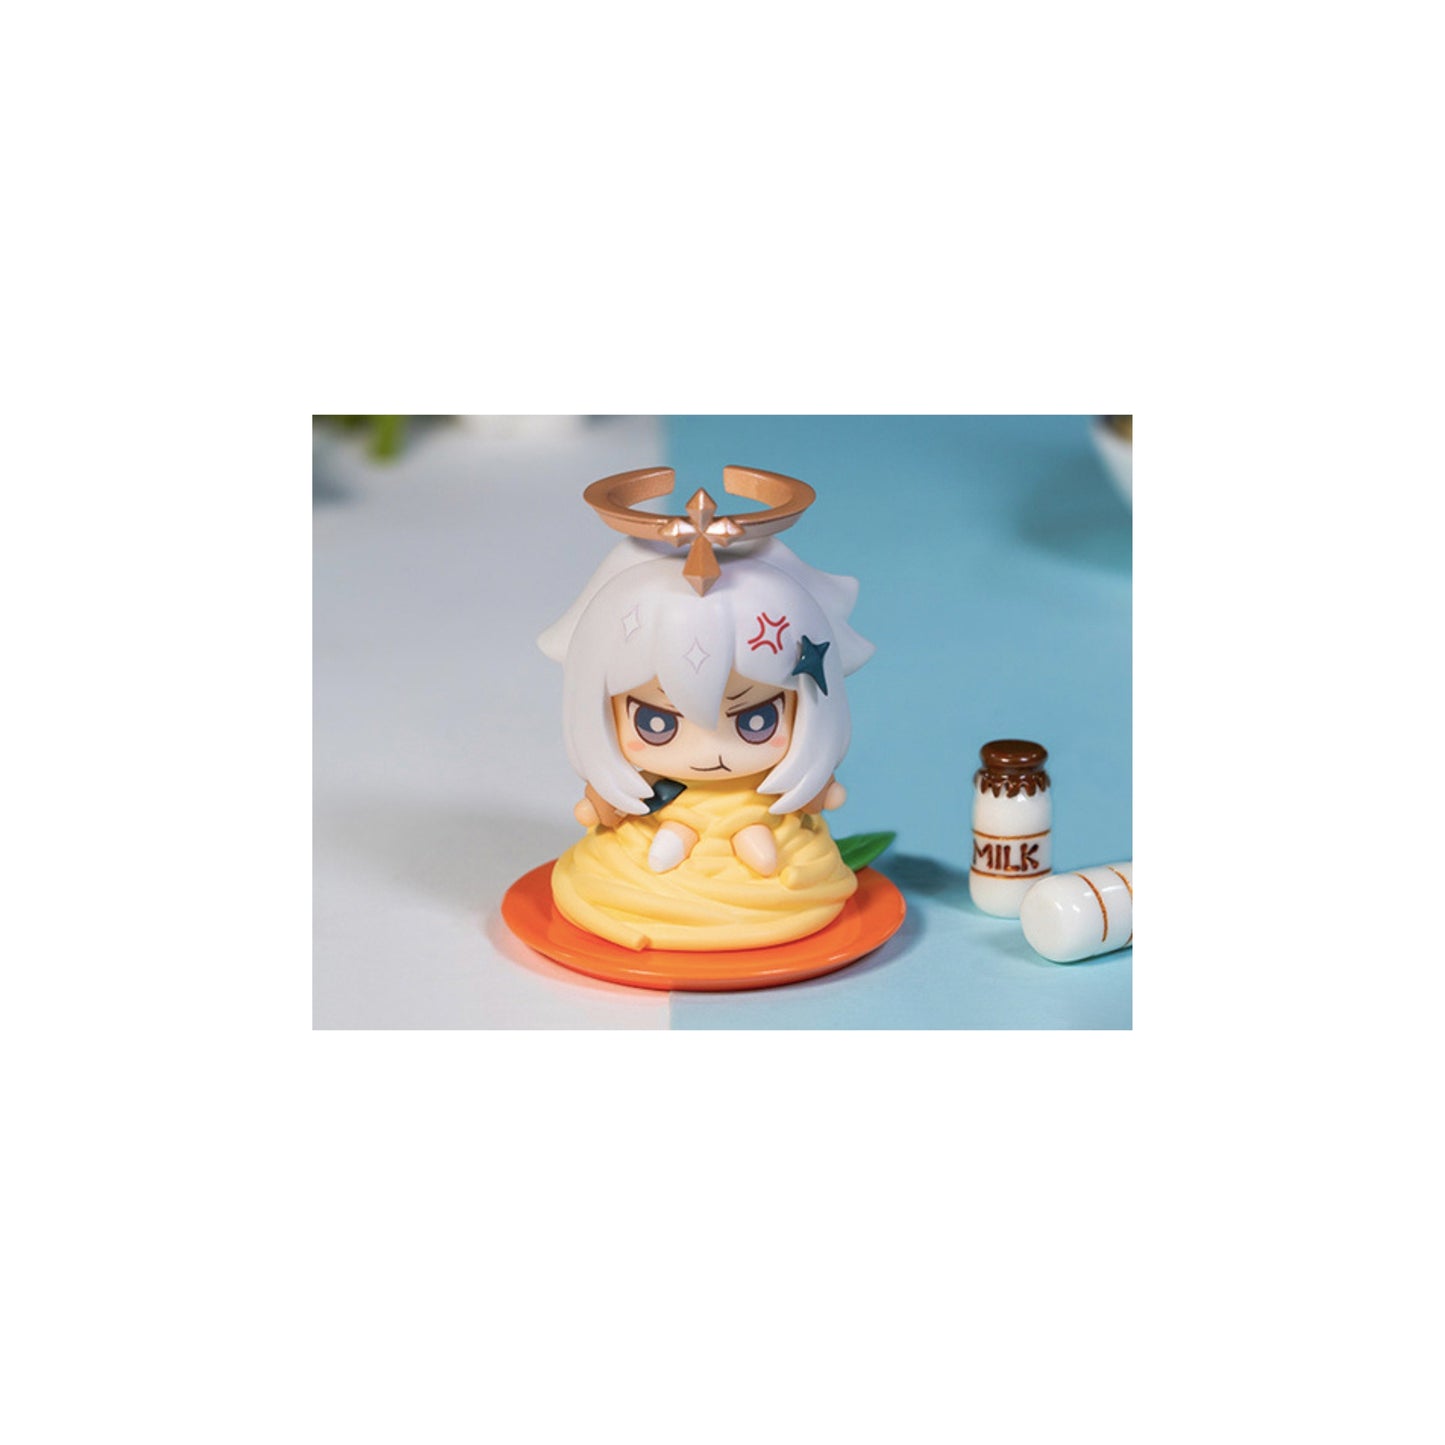 Genshin Impact - Paimon Trading Figur - Flaming Red Bolognese